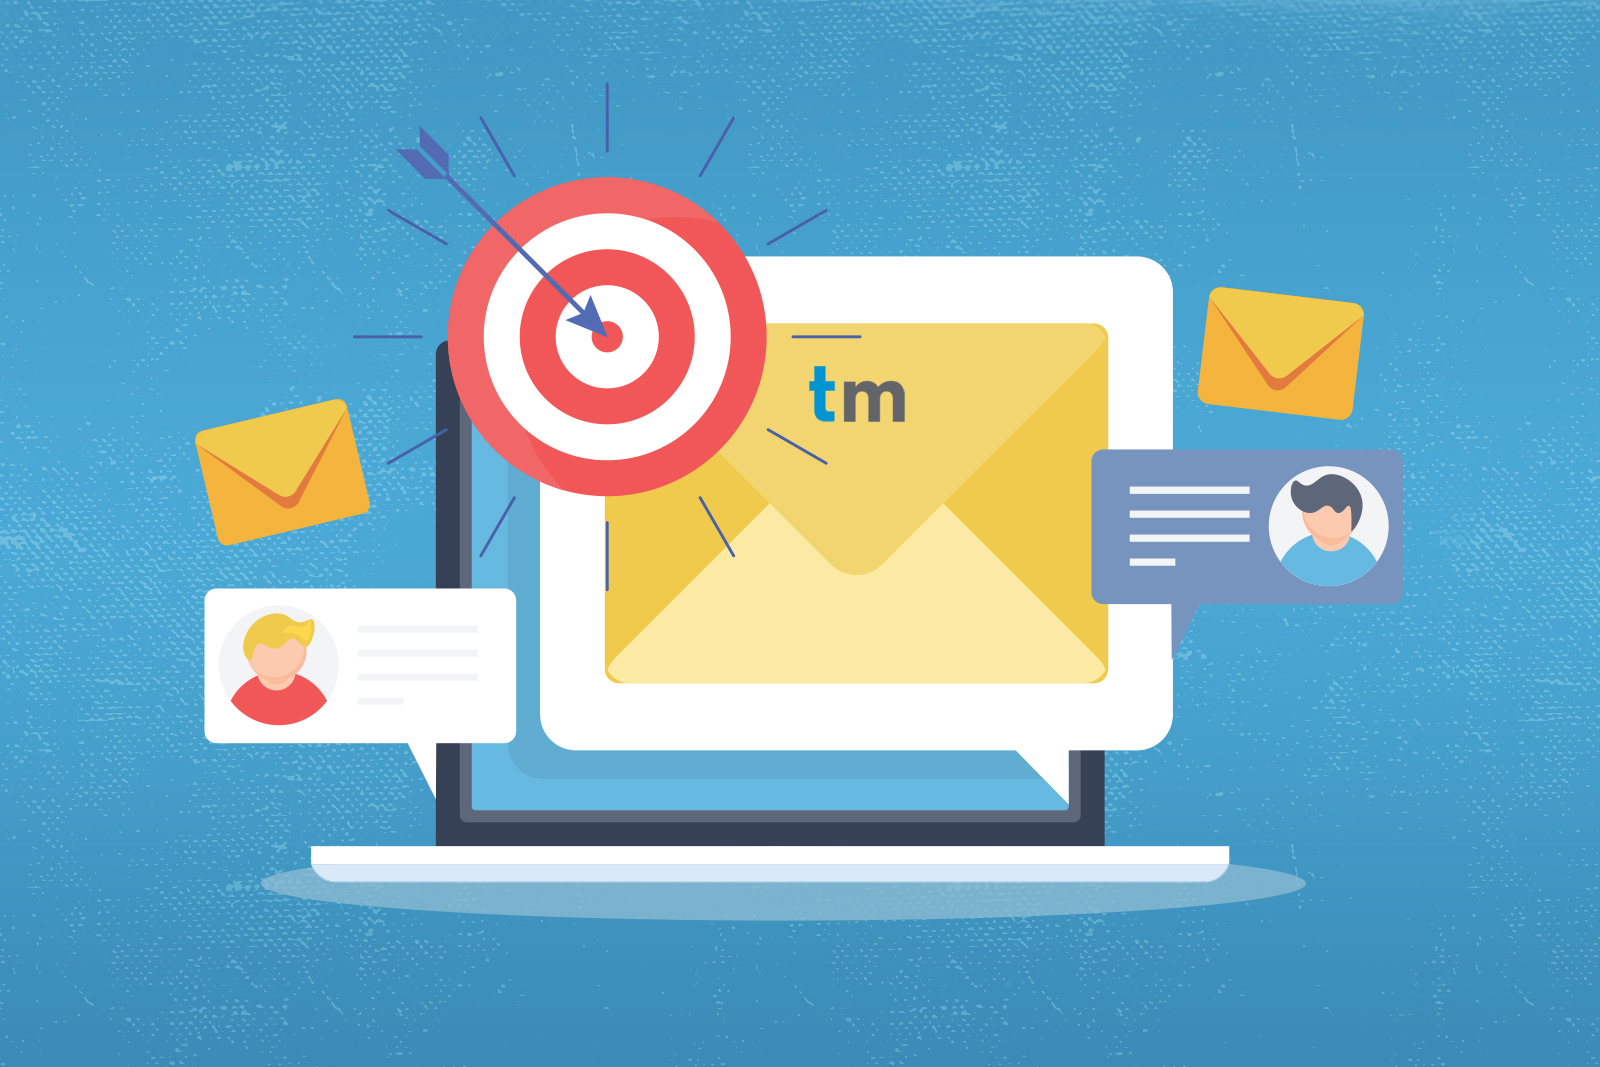 Flat design web banner illustration for Targeting online audience with email marketing campaign. Illustration of a laptop computer with an envelope mail emoji over top of it with a target bulls-eye emoji.